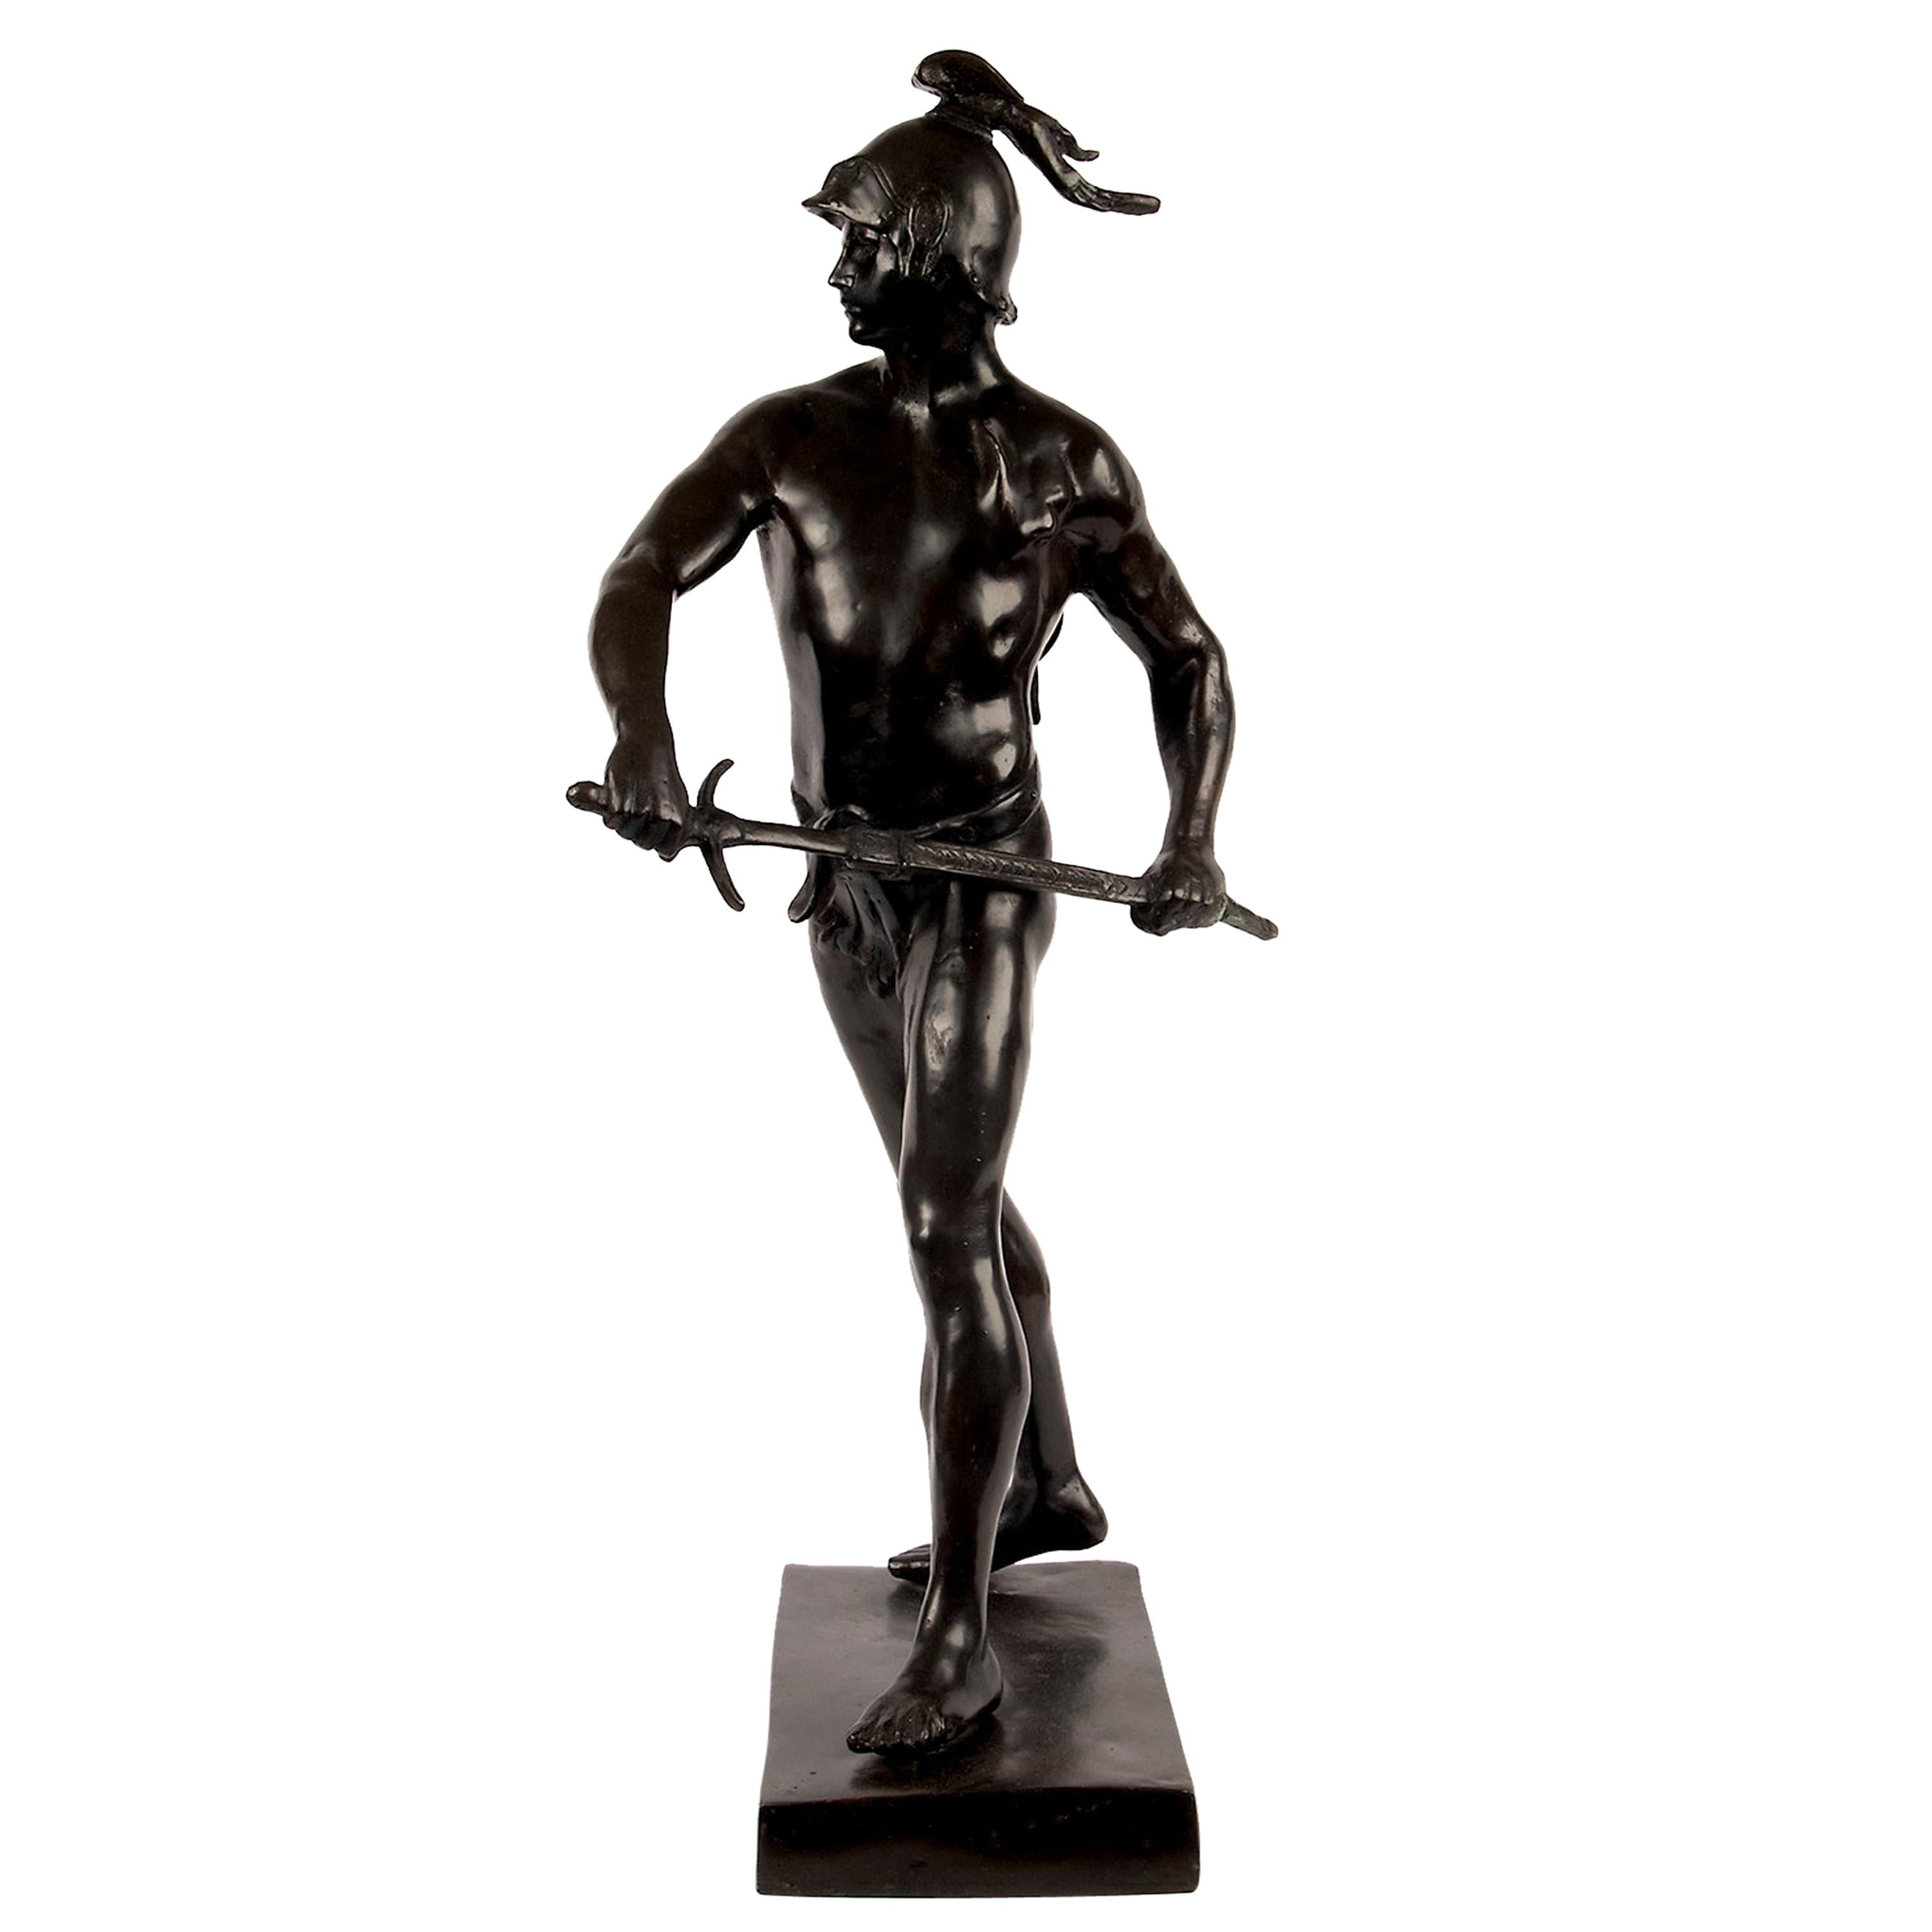 Large, Continental "Bronze" Sculpture of a Spartan Warrior with Sword, Roman